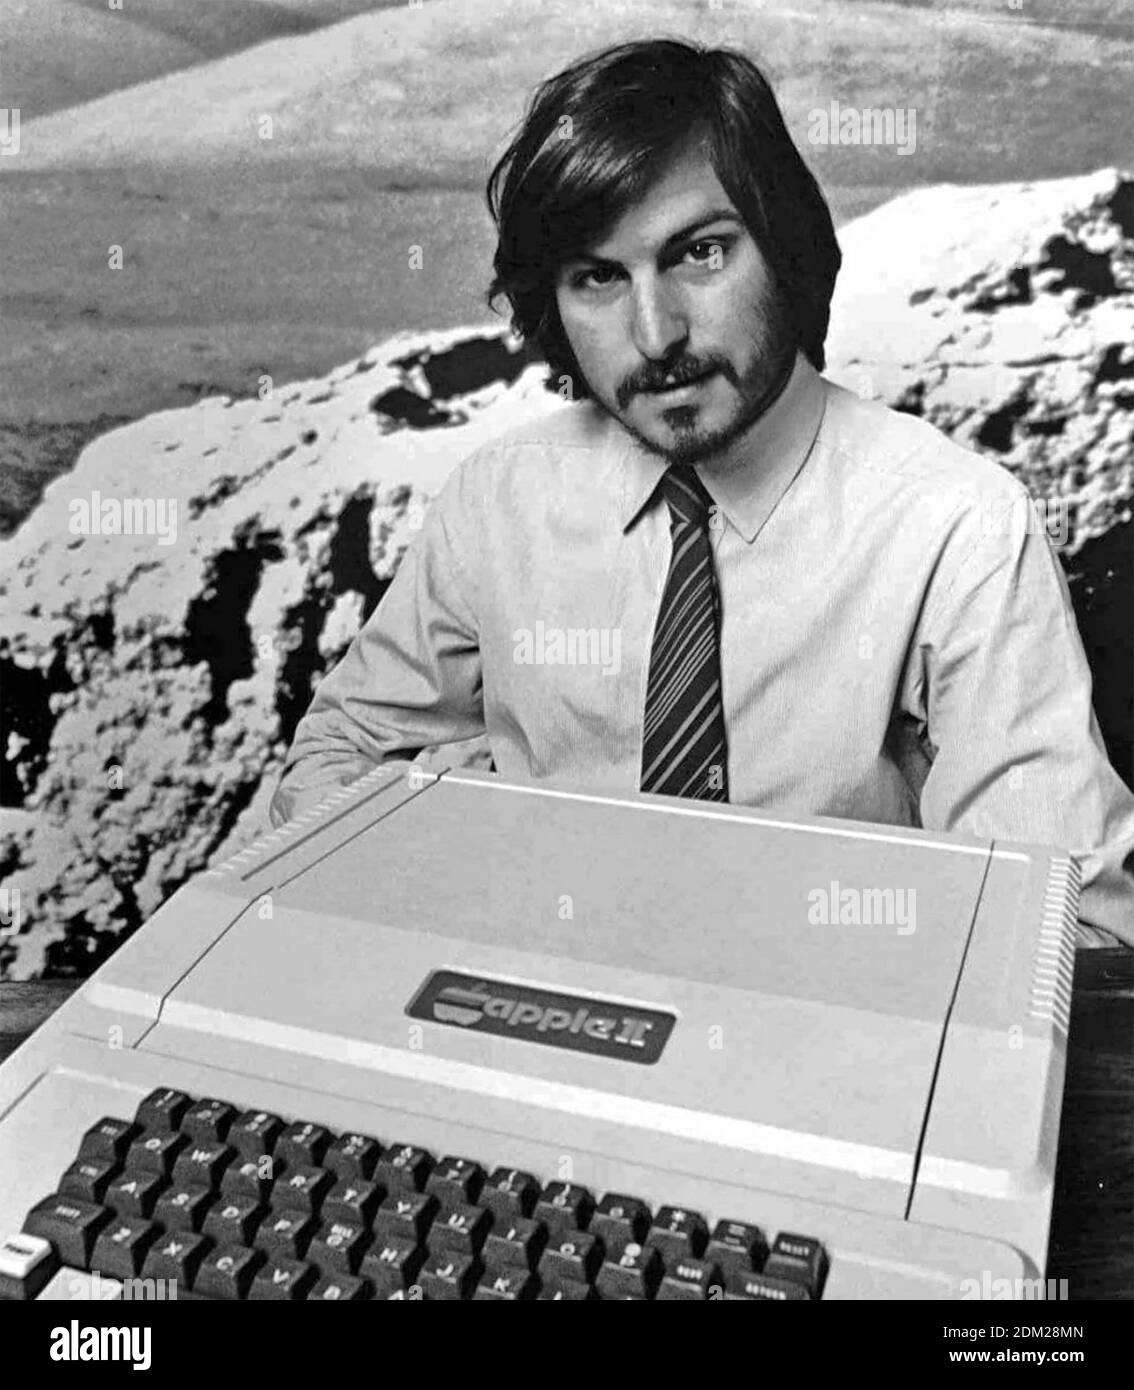 STEVE JOBS (1955-2011) American co-founder of Apple Inc with one of the Apple  II series of computers about 1978 Stock Photo - Alamy